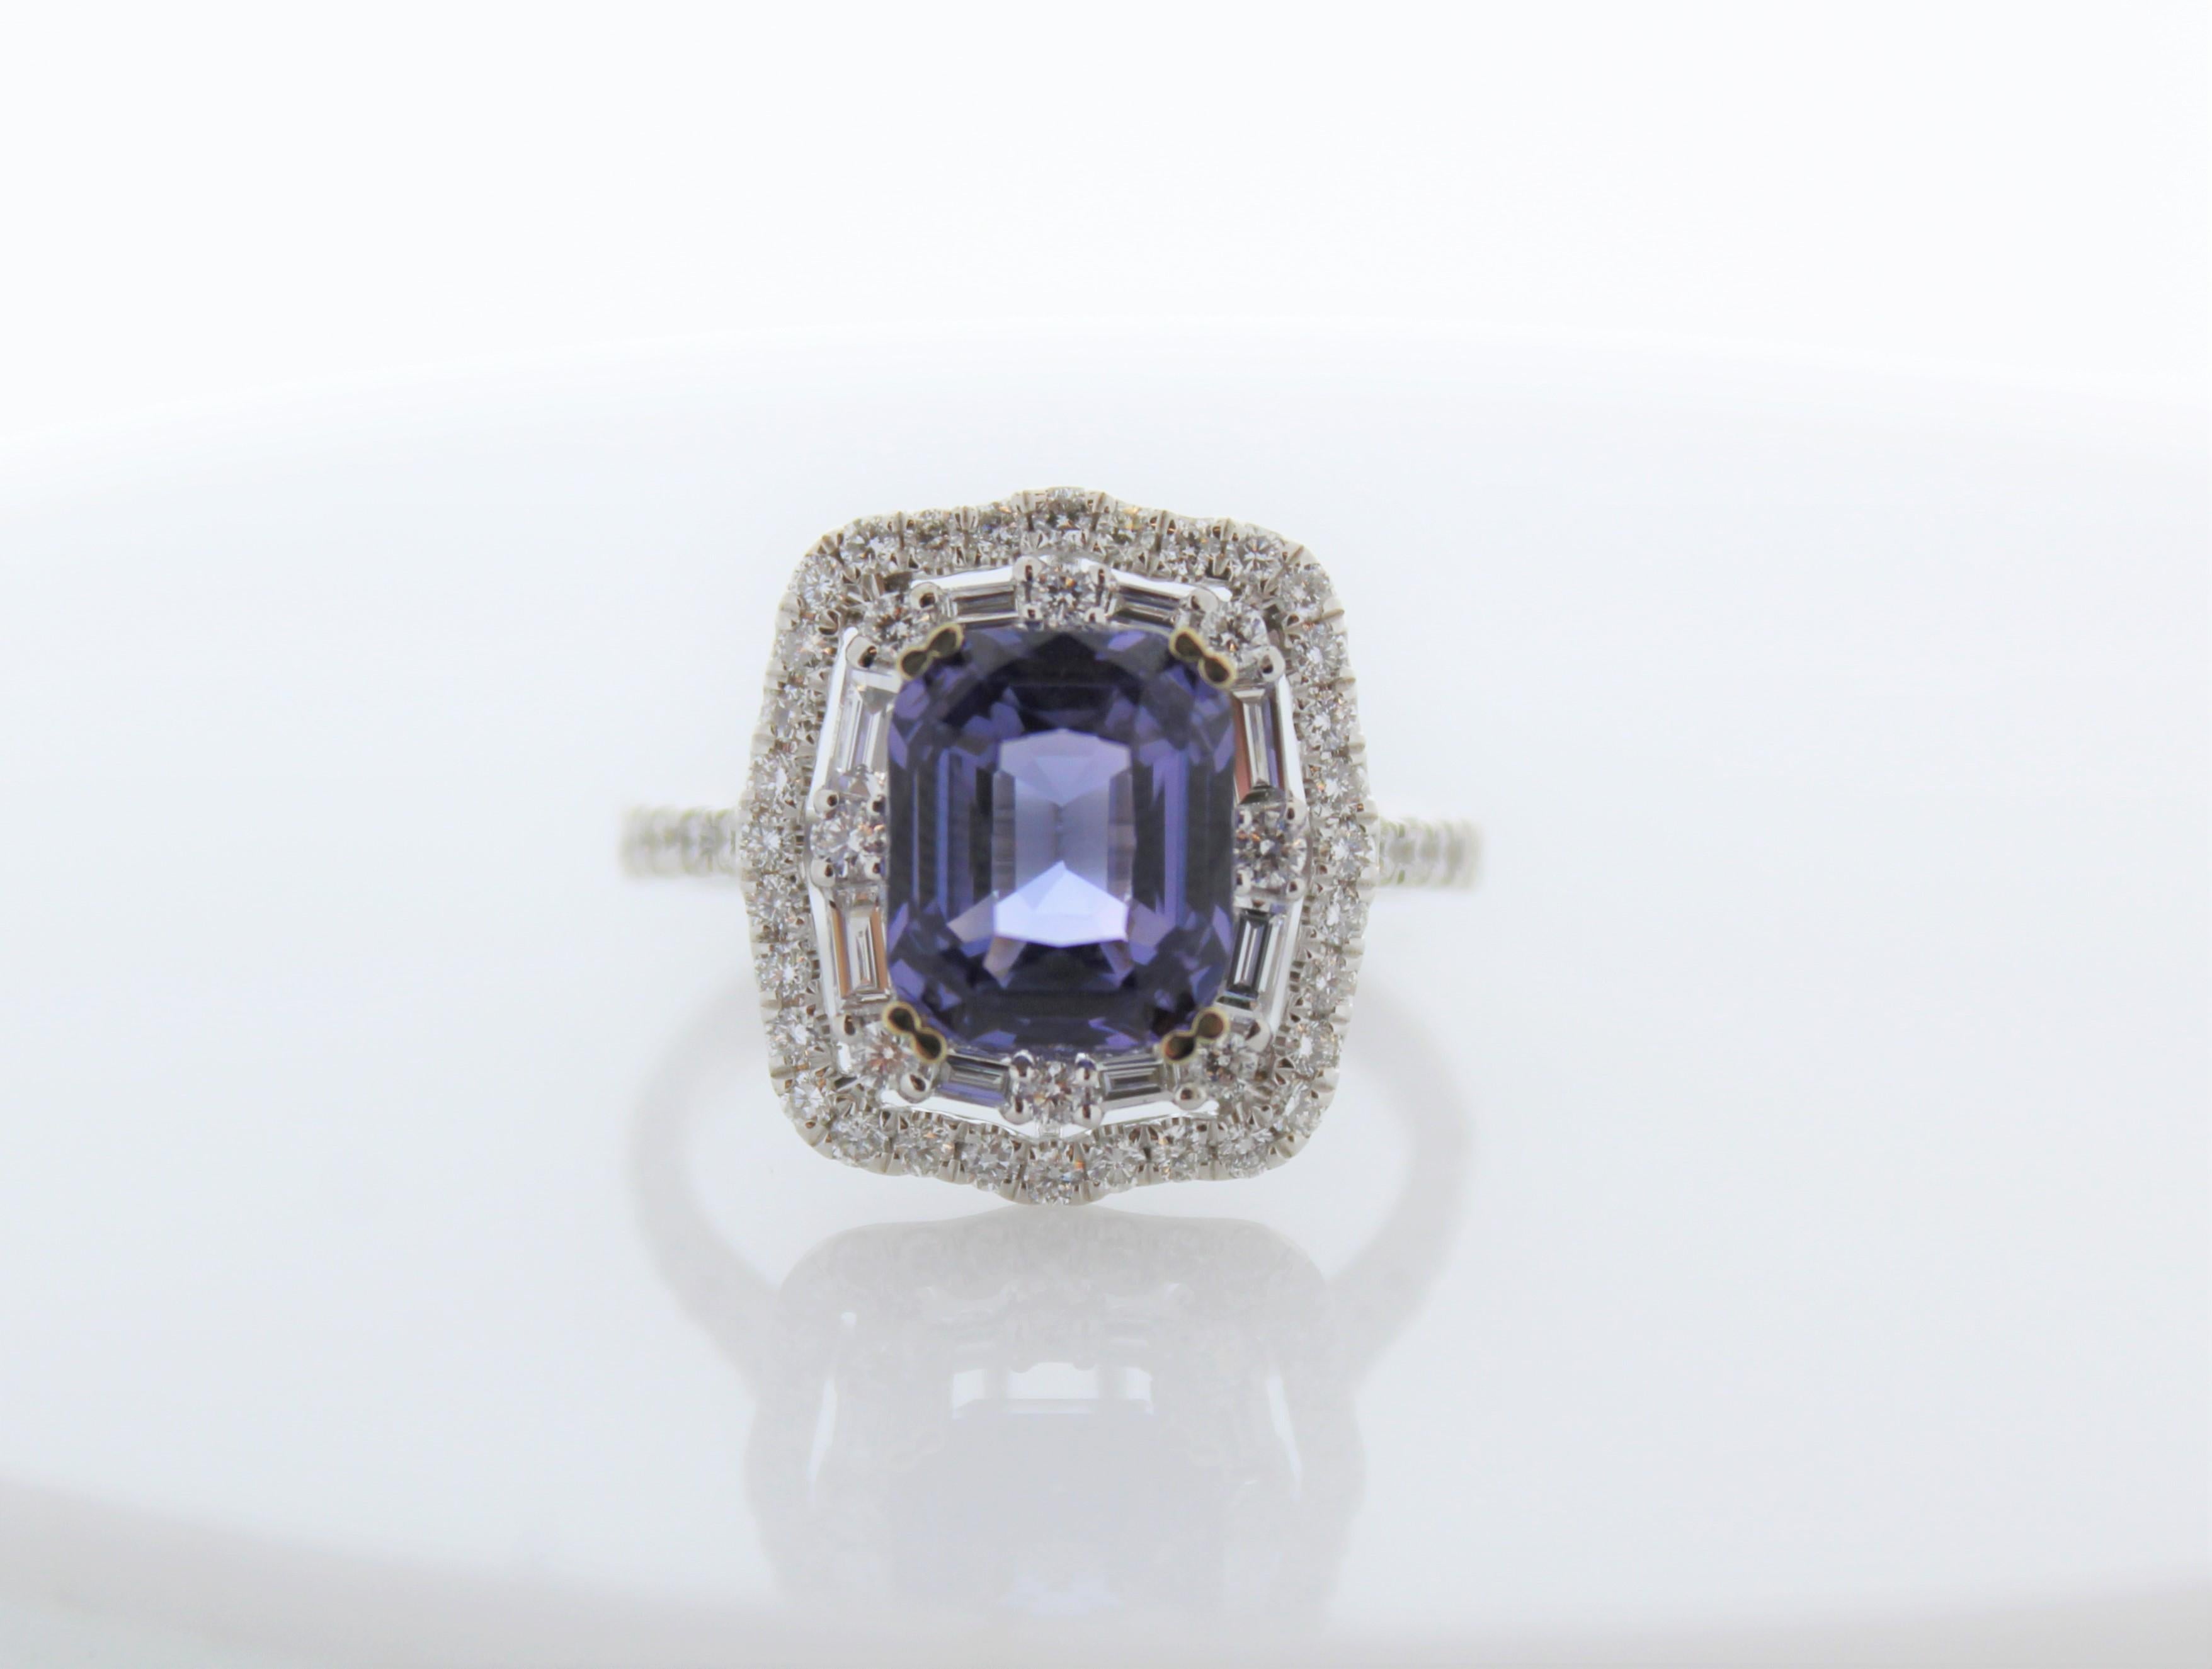 A ring fit for a queen! Your eye will be drawn magnetically to the 3.51 carats royal blue sapphire that is surrounded by a dazzling halo of round brilliant diamonds. The sapphire is from Sri Lanka. The color is royal blue; the luster & clarity are